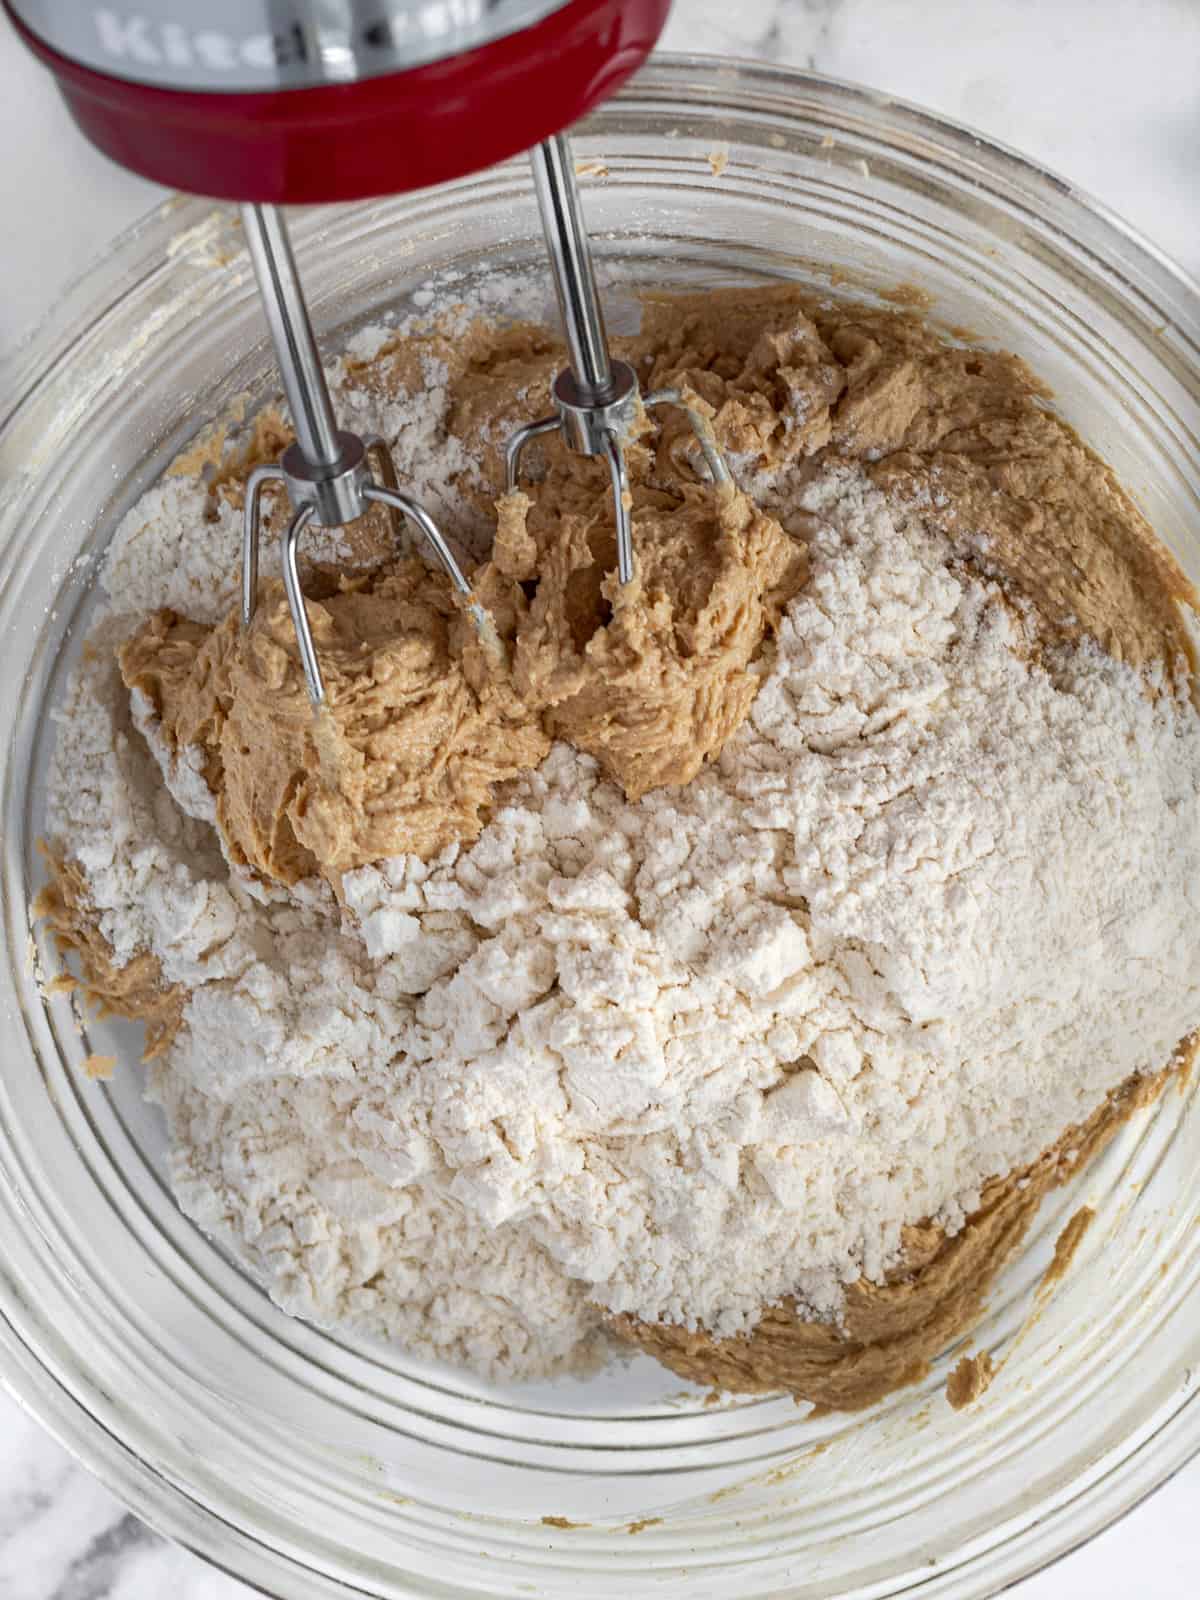 Creamed peanut butter and butter, sugar and flour in a mixing bowl.